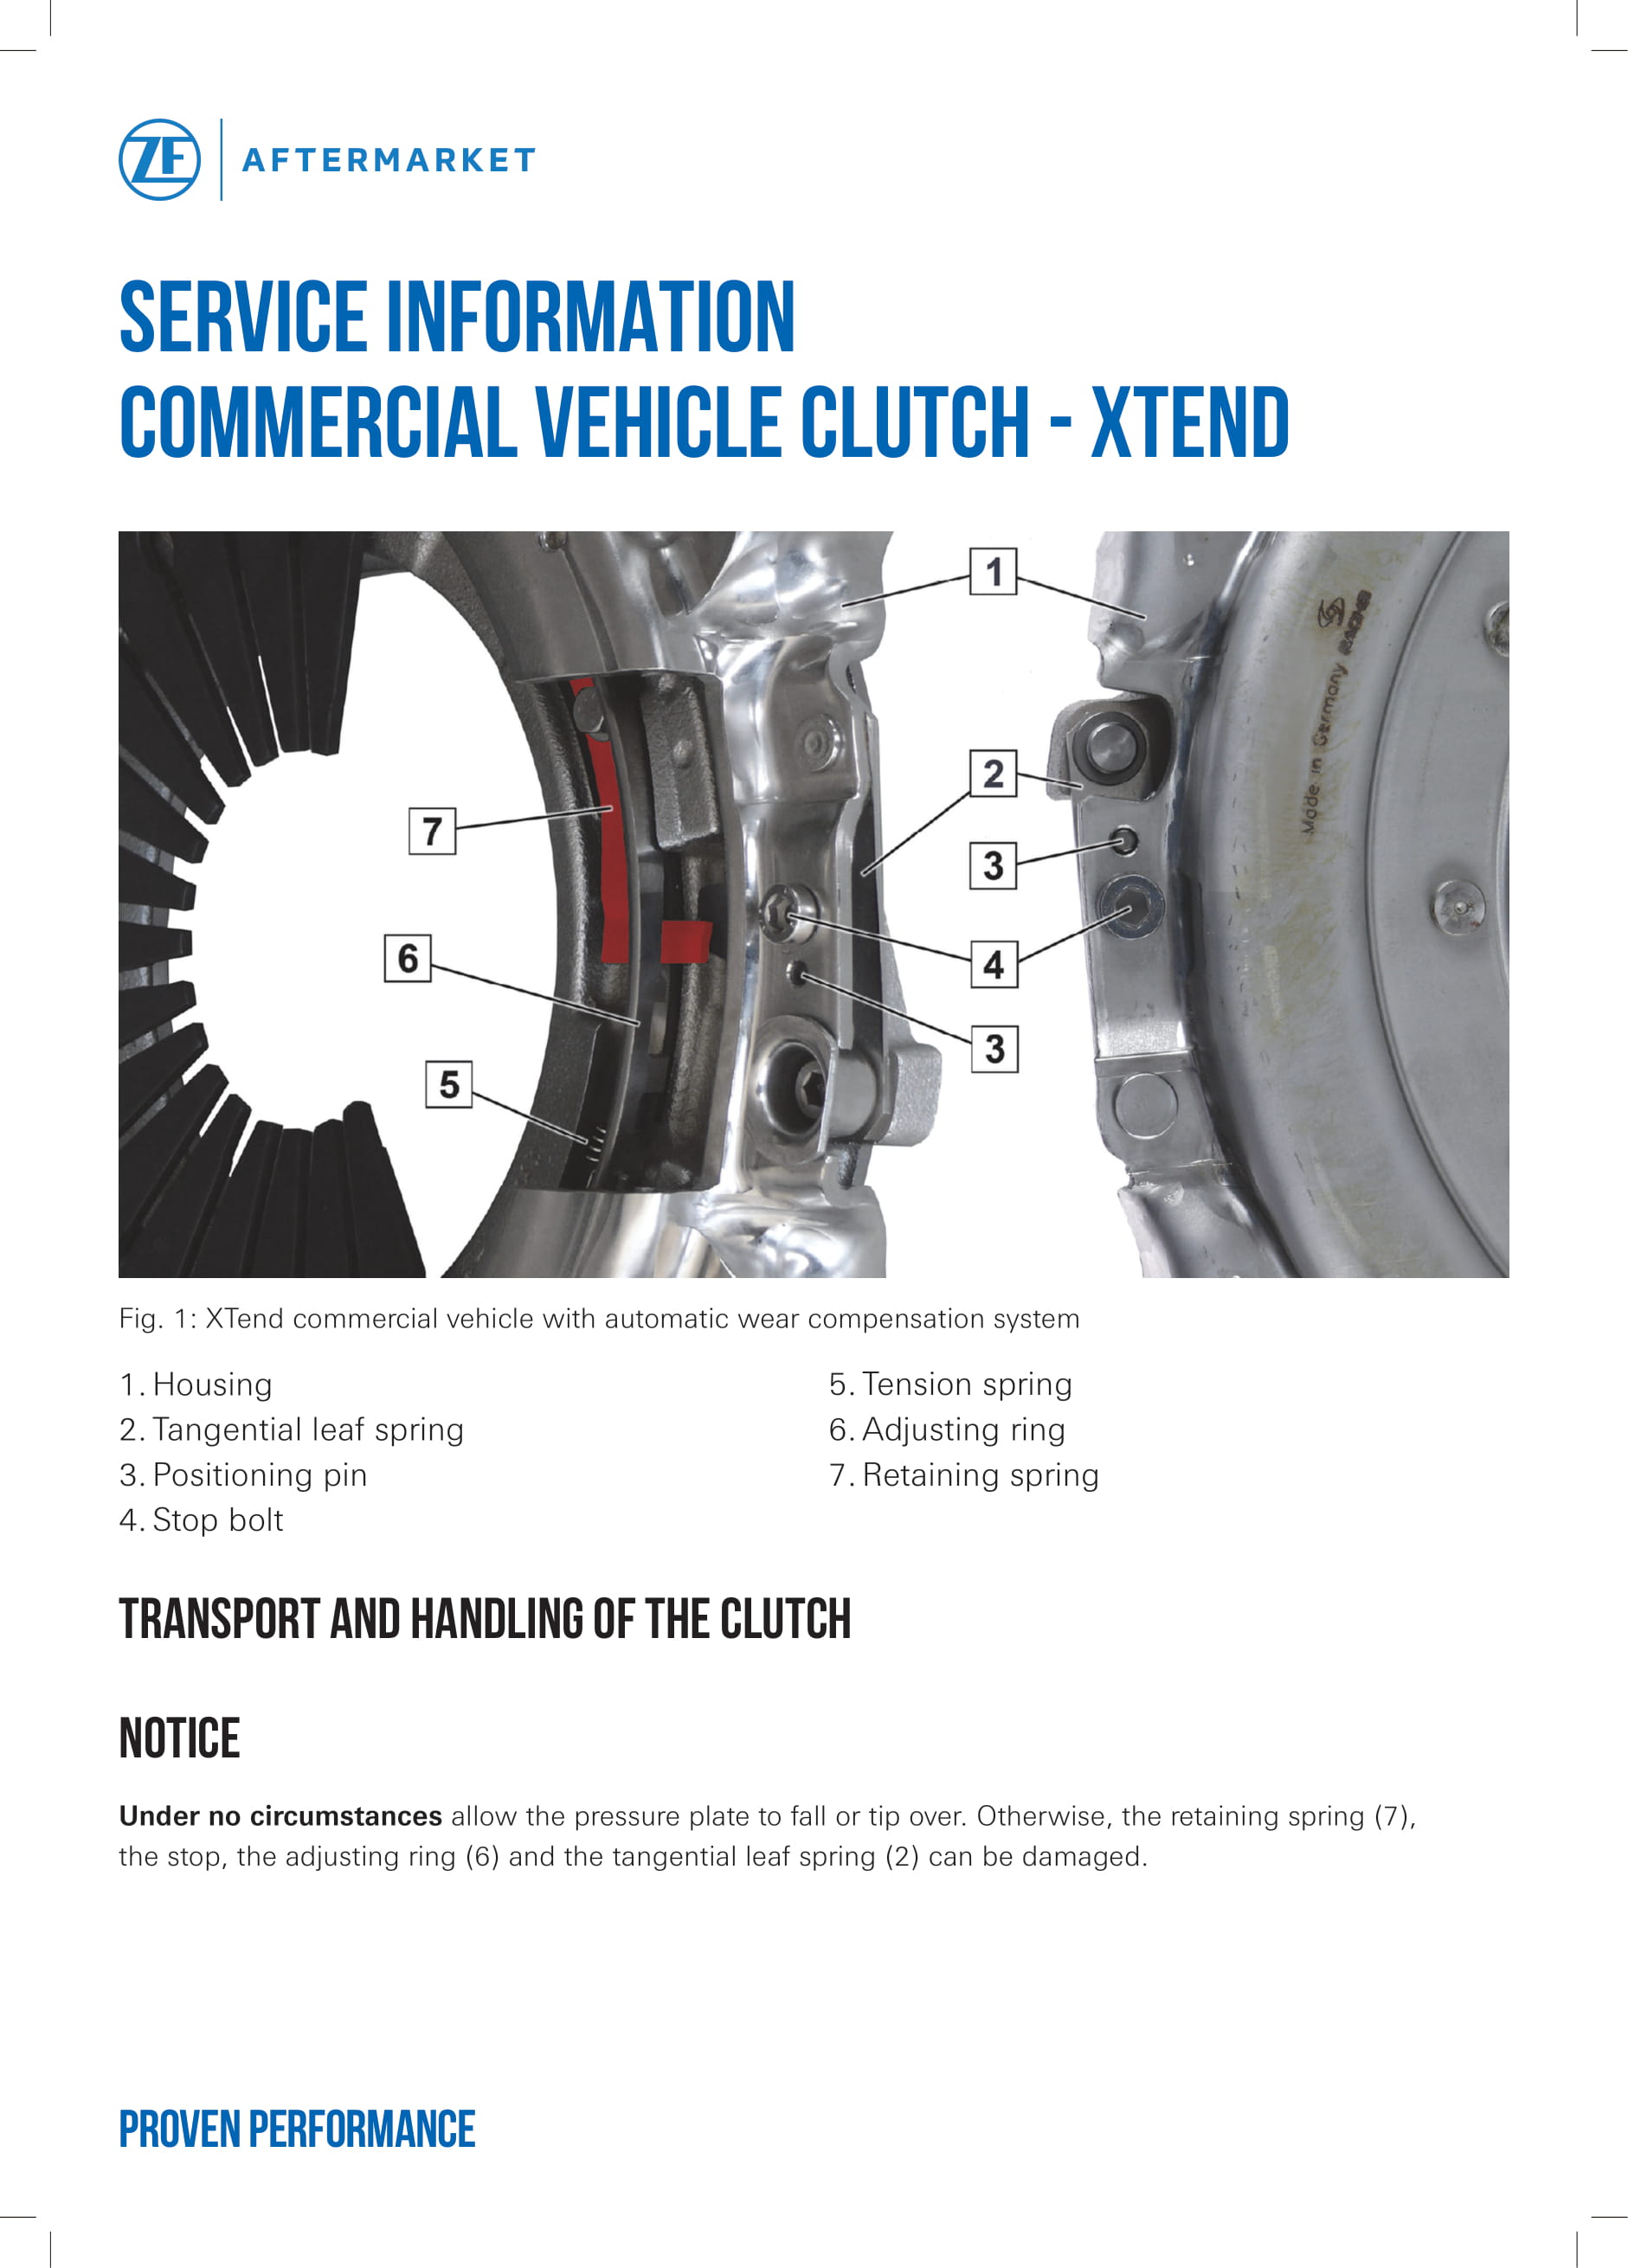 Service Information Commercial vehicle clutch - XTend